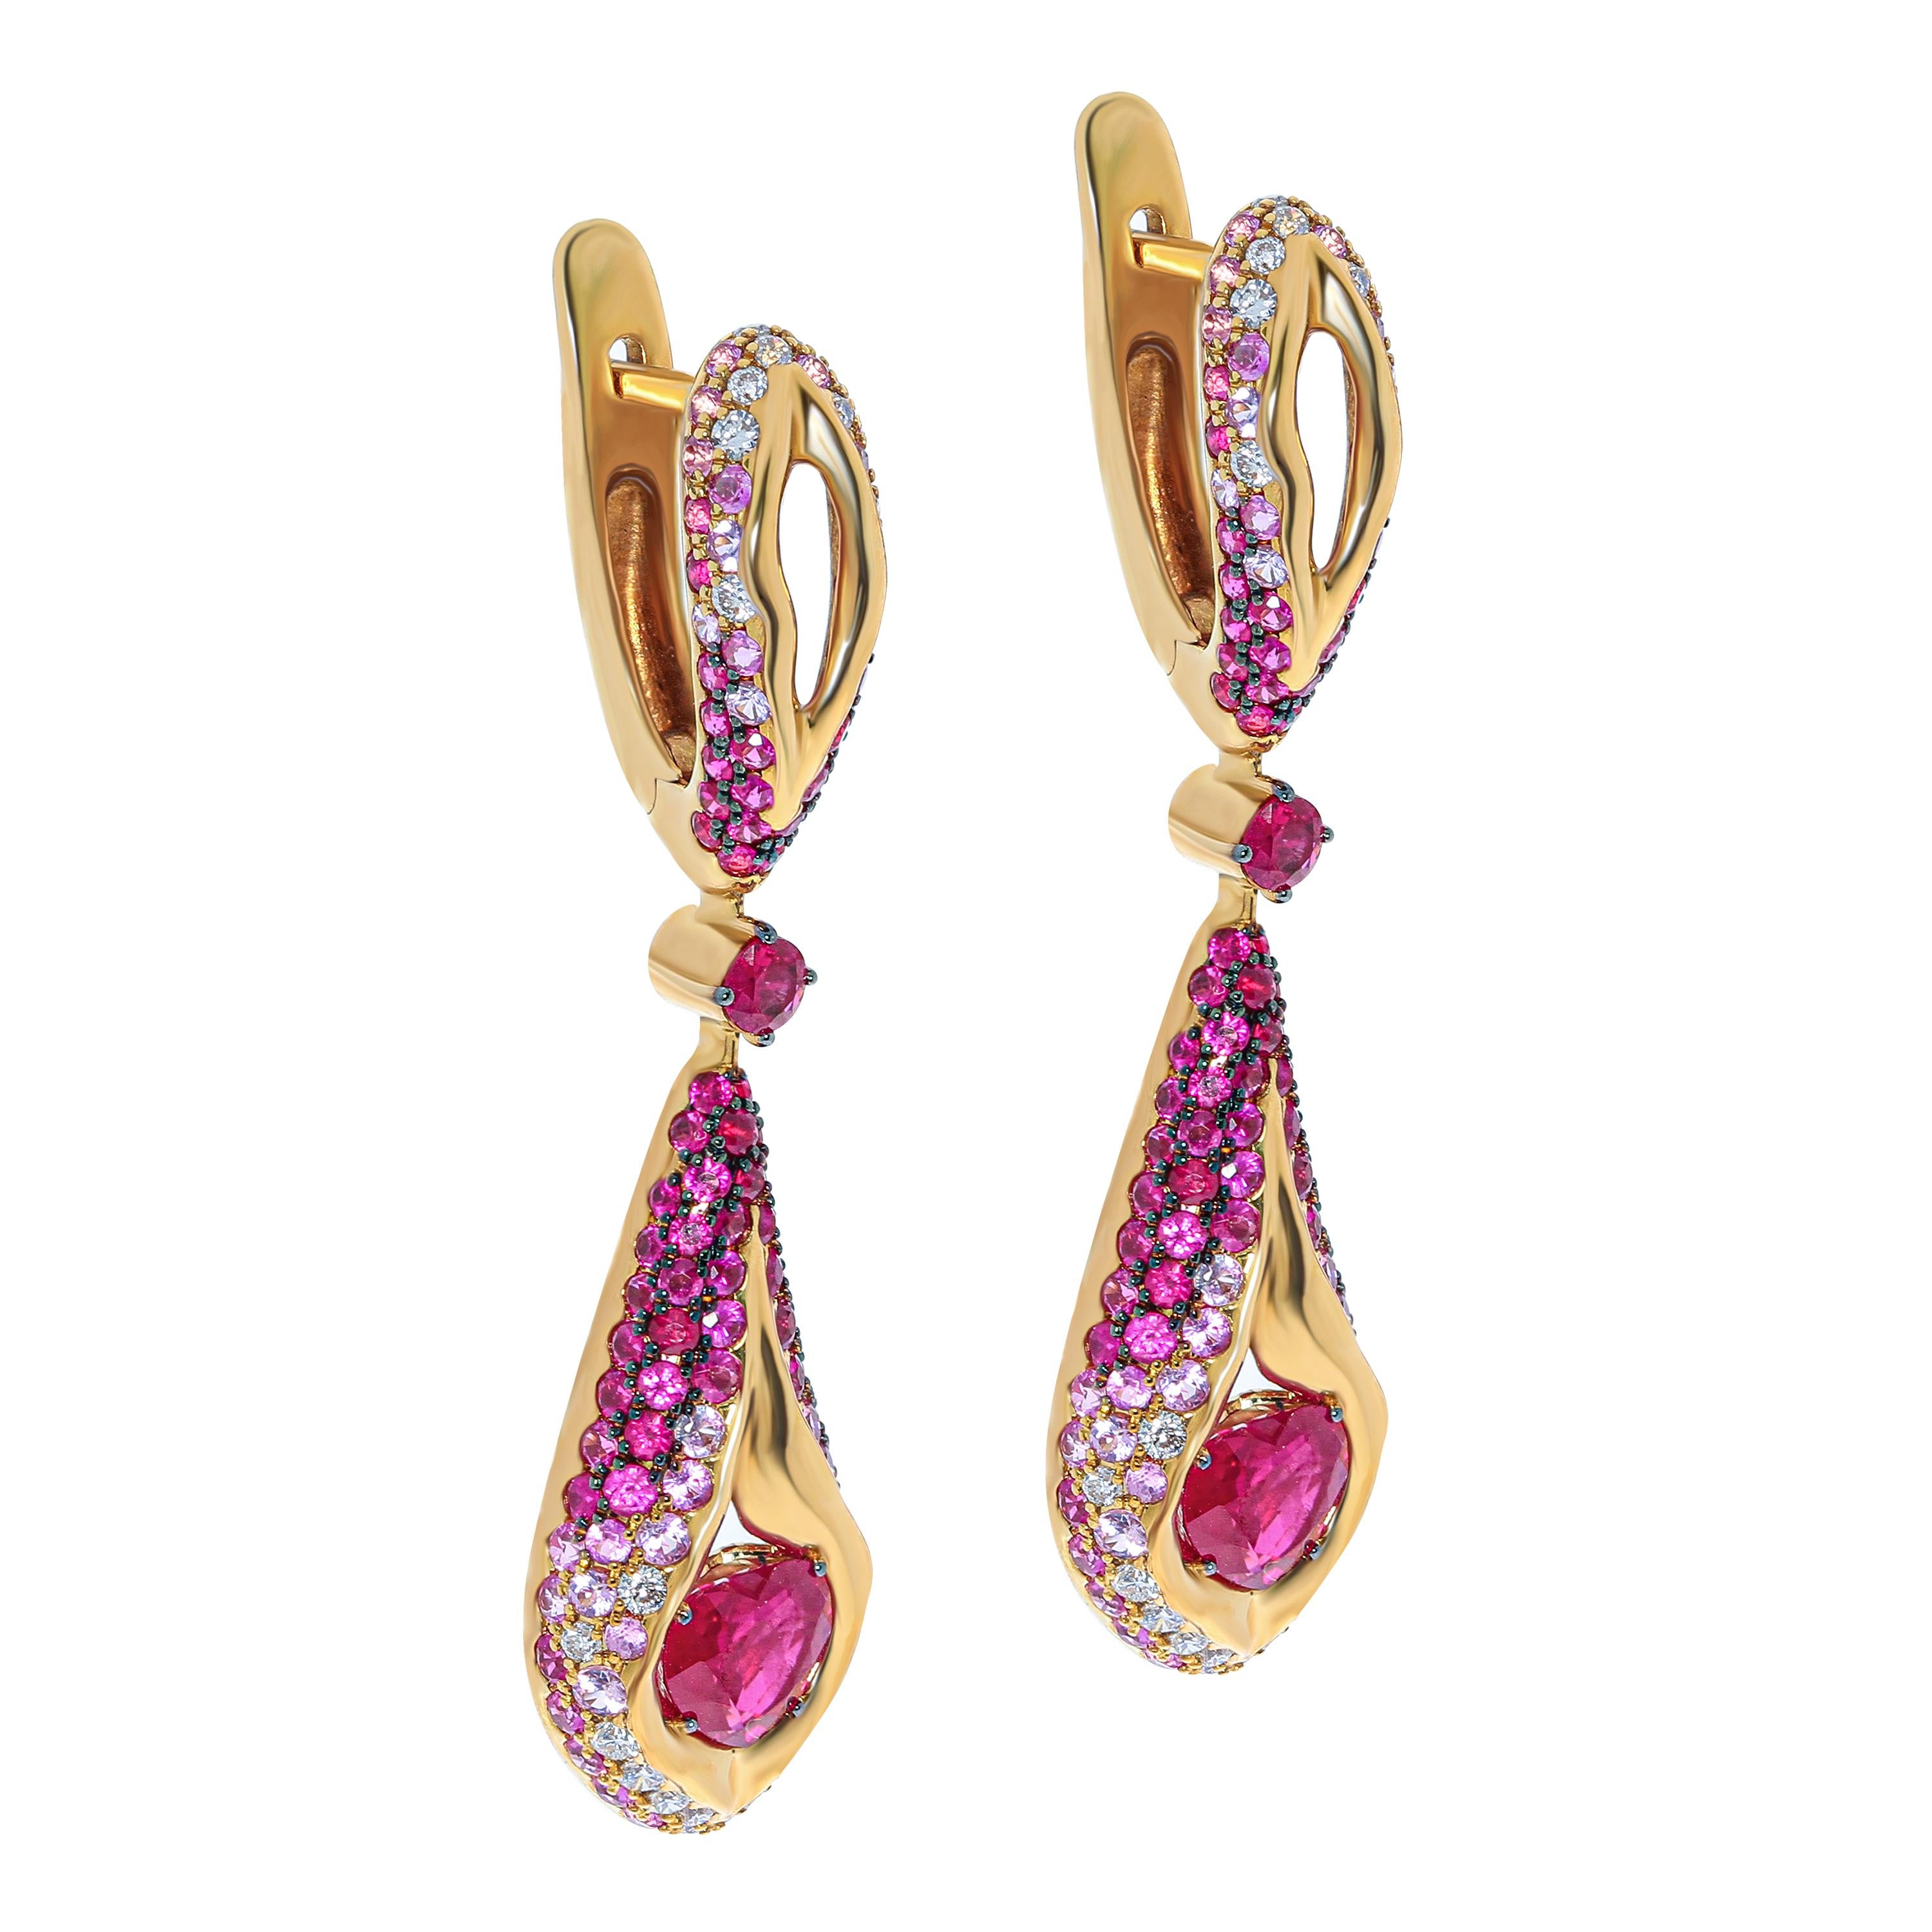 Ruby 1.14 Carat Pink Sapphires Diamonds 18 Karat Yellow Gold HeartBeat Earrings
Earrings from the HeartBeat Collection. Сomposition resembles an exploded volcano, from the mouth of which lava flows from all sides. Center of the Yellow 18K Gold